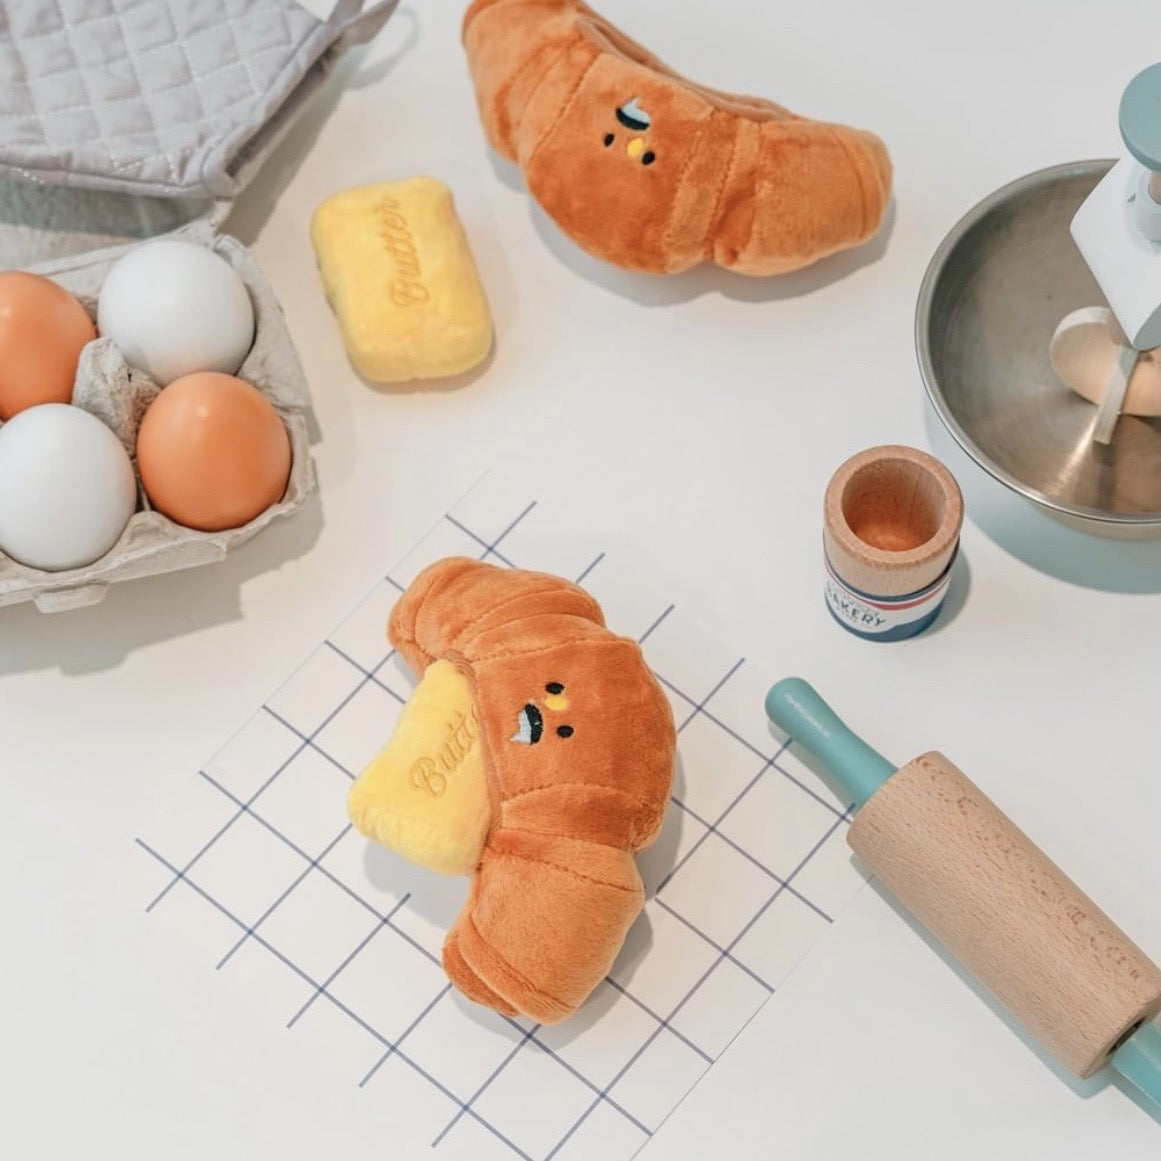 Bakery Cafe Dog Toy Collection